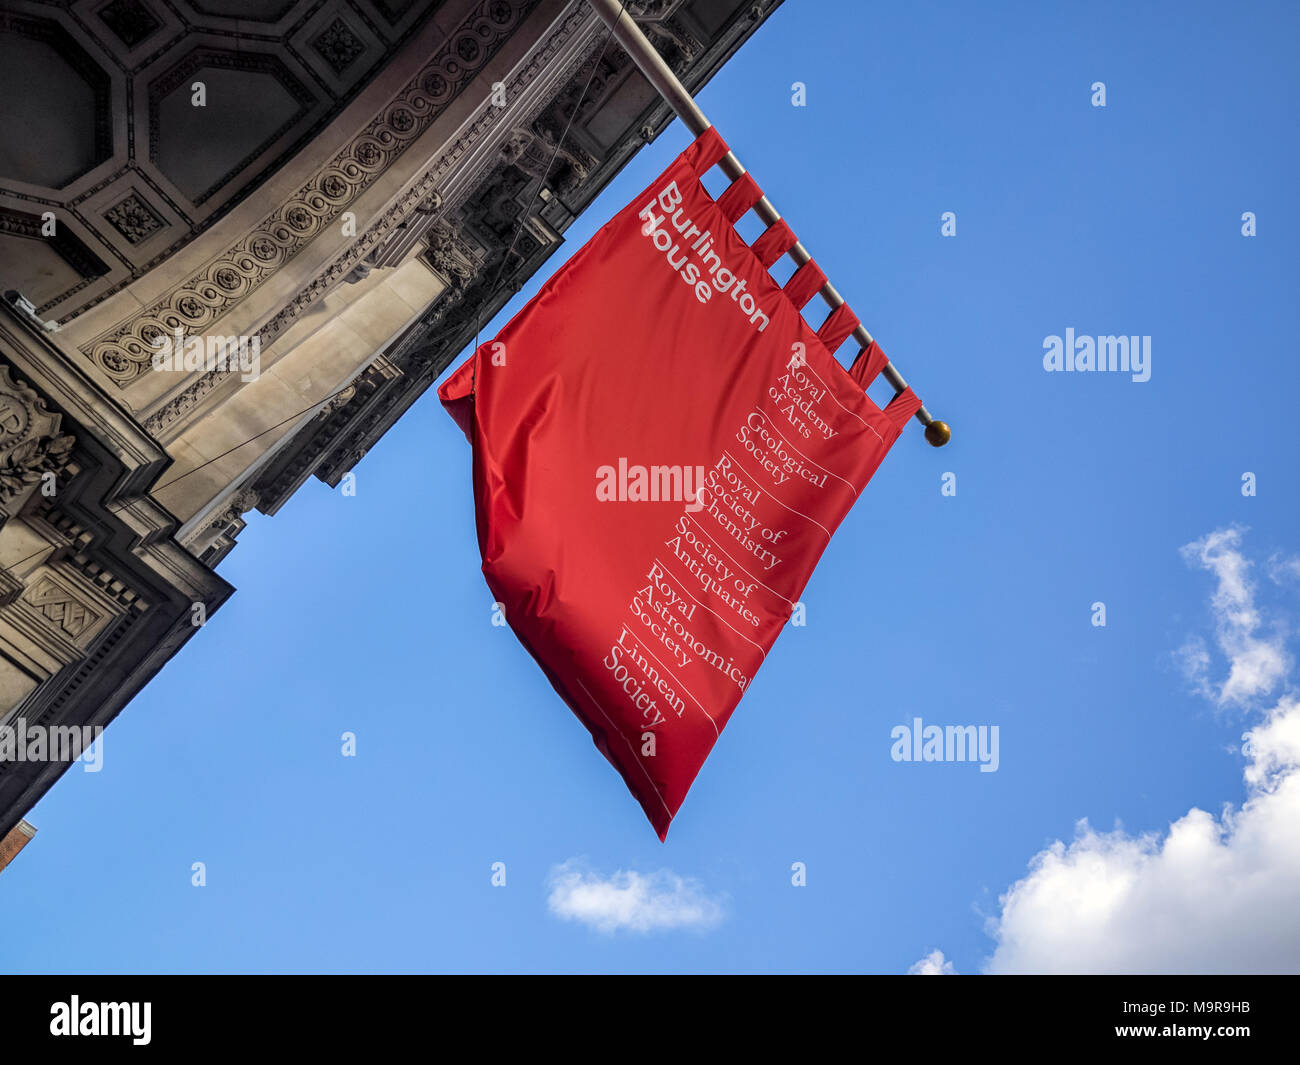 LONDON, UK - MARCH 08, 2018:  Banner sign outside former Mansion building which now houses a number of societies including the Royal Academy of Arts Stock Photo